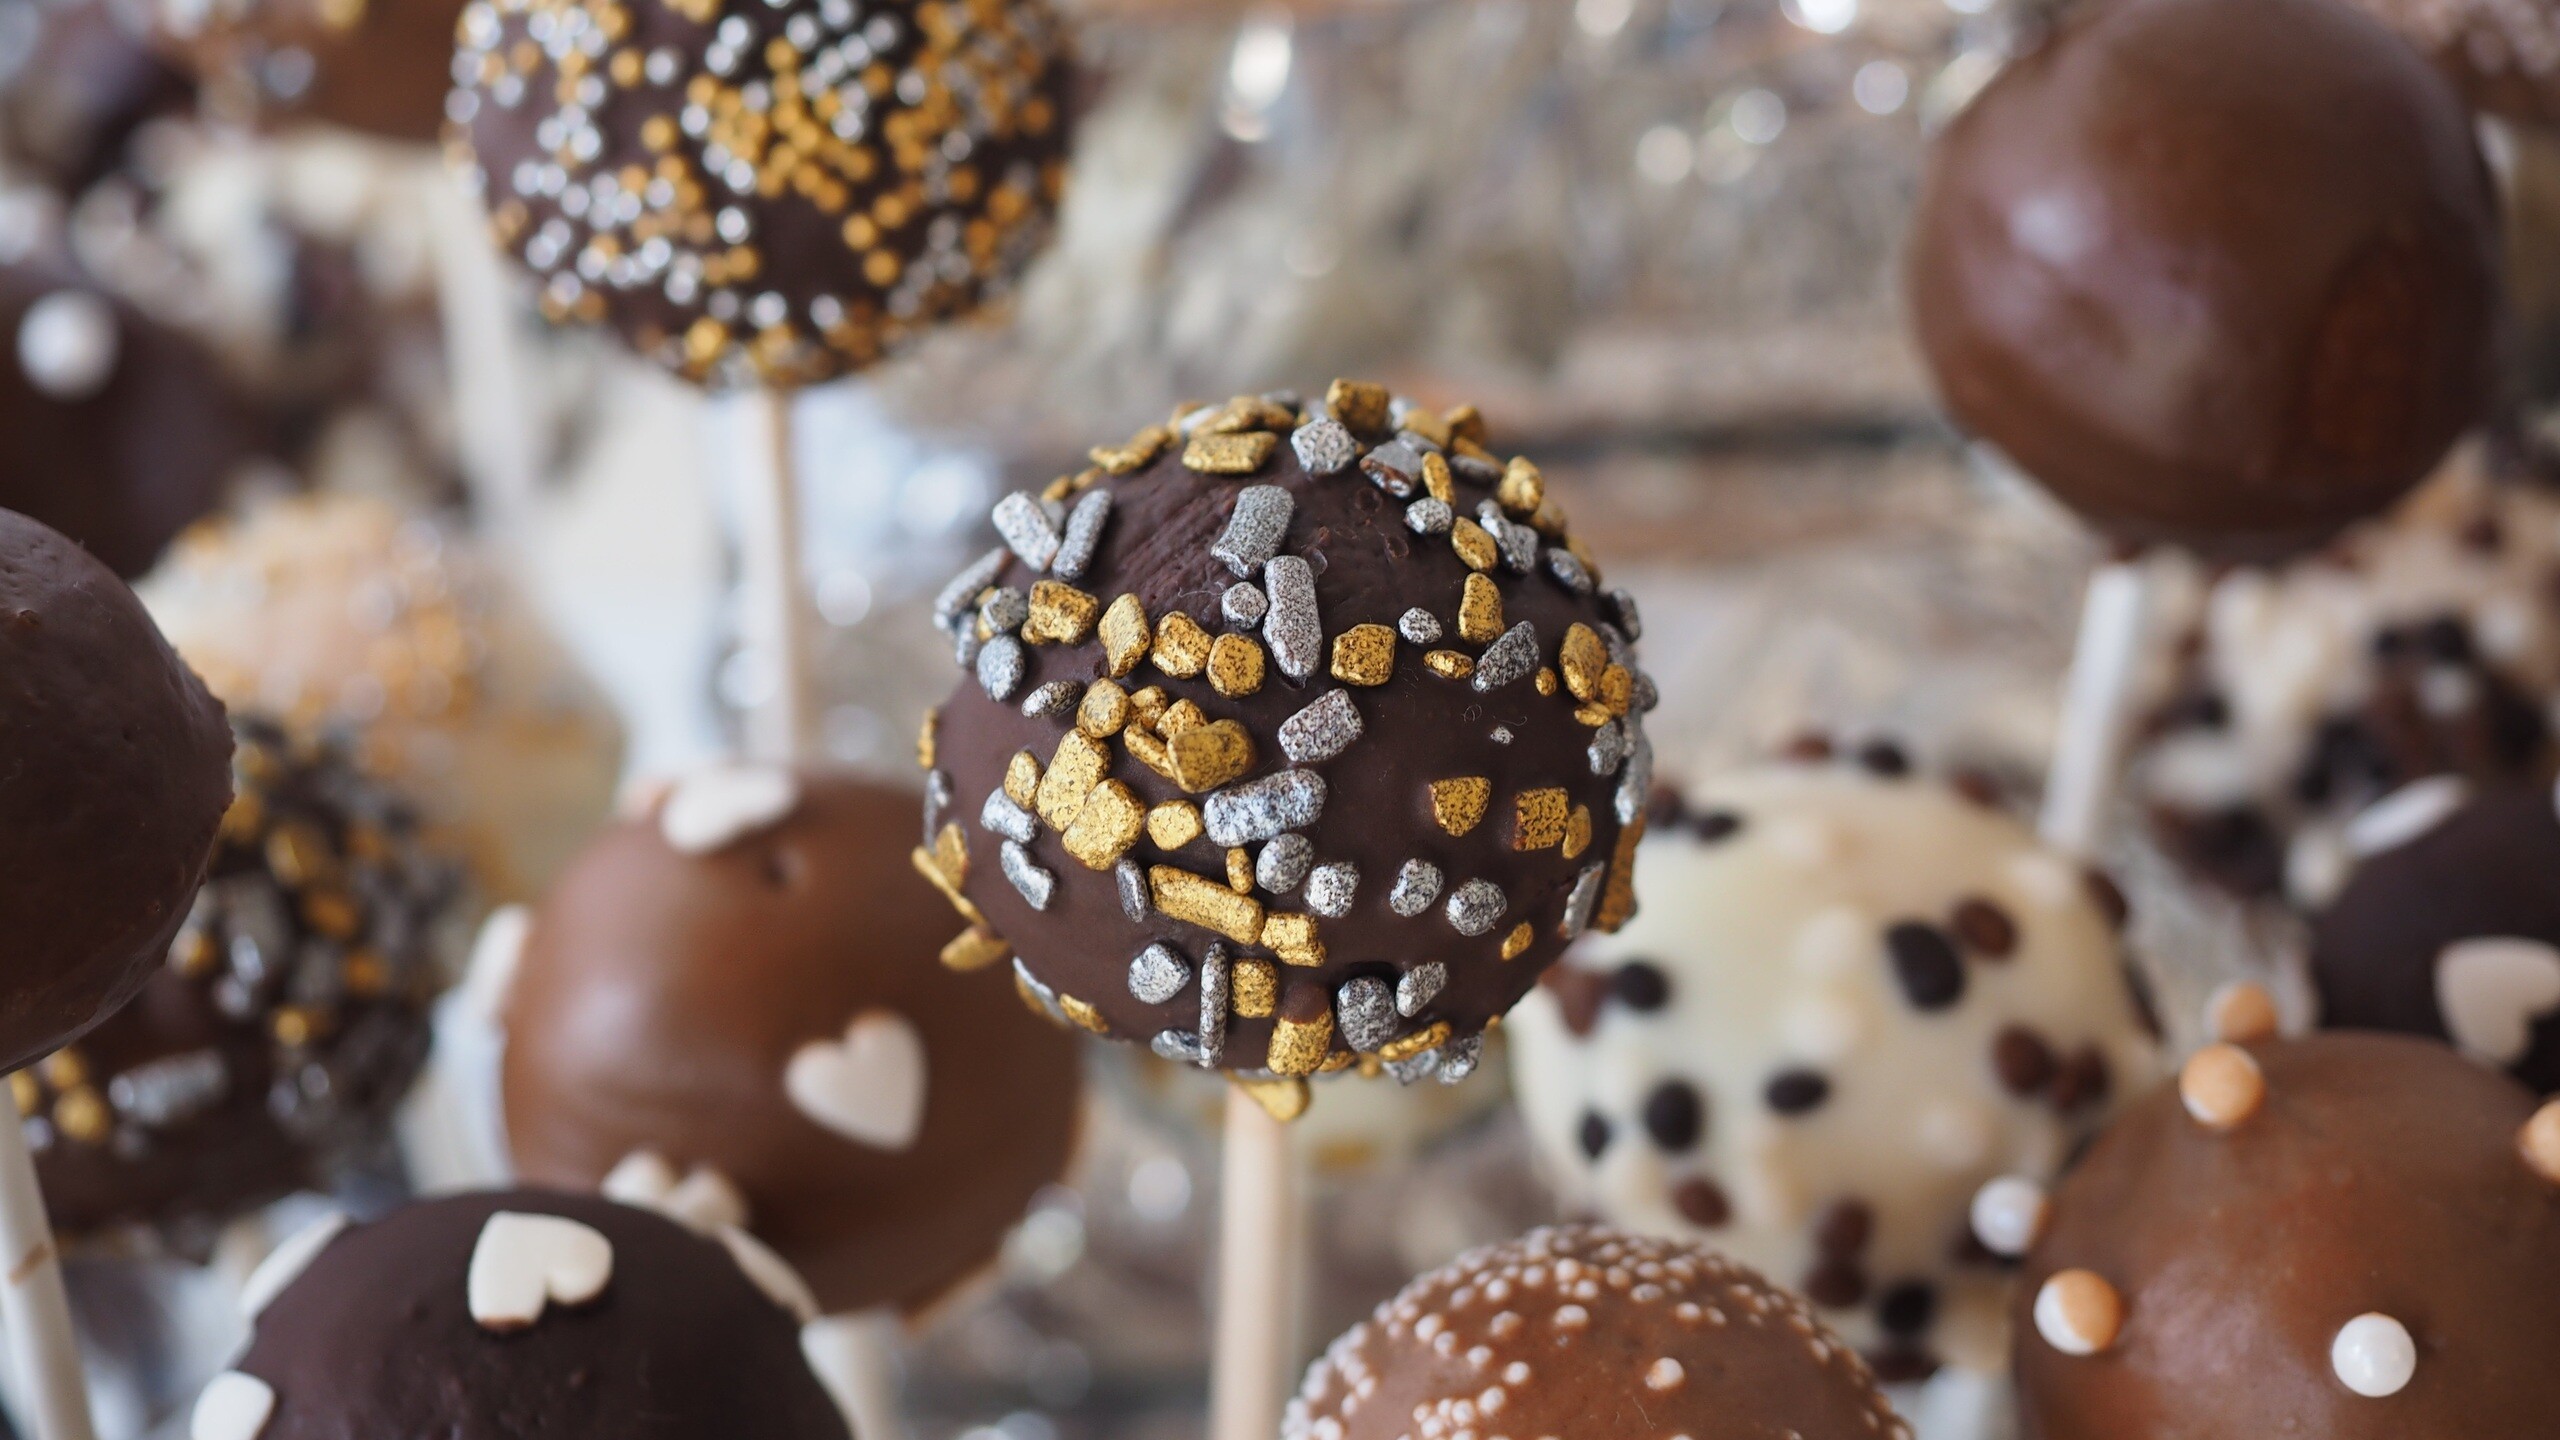 Sweets: Confections made from chocolate or incorporating chocolate. 2560x1440 HD Wallpaper.